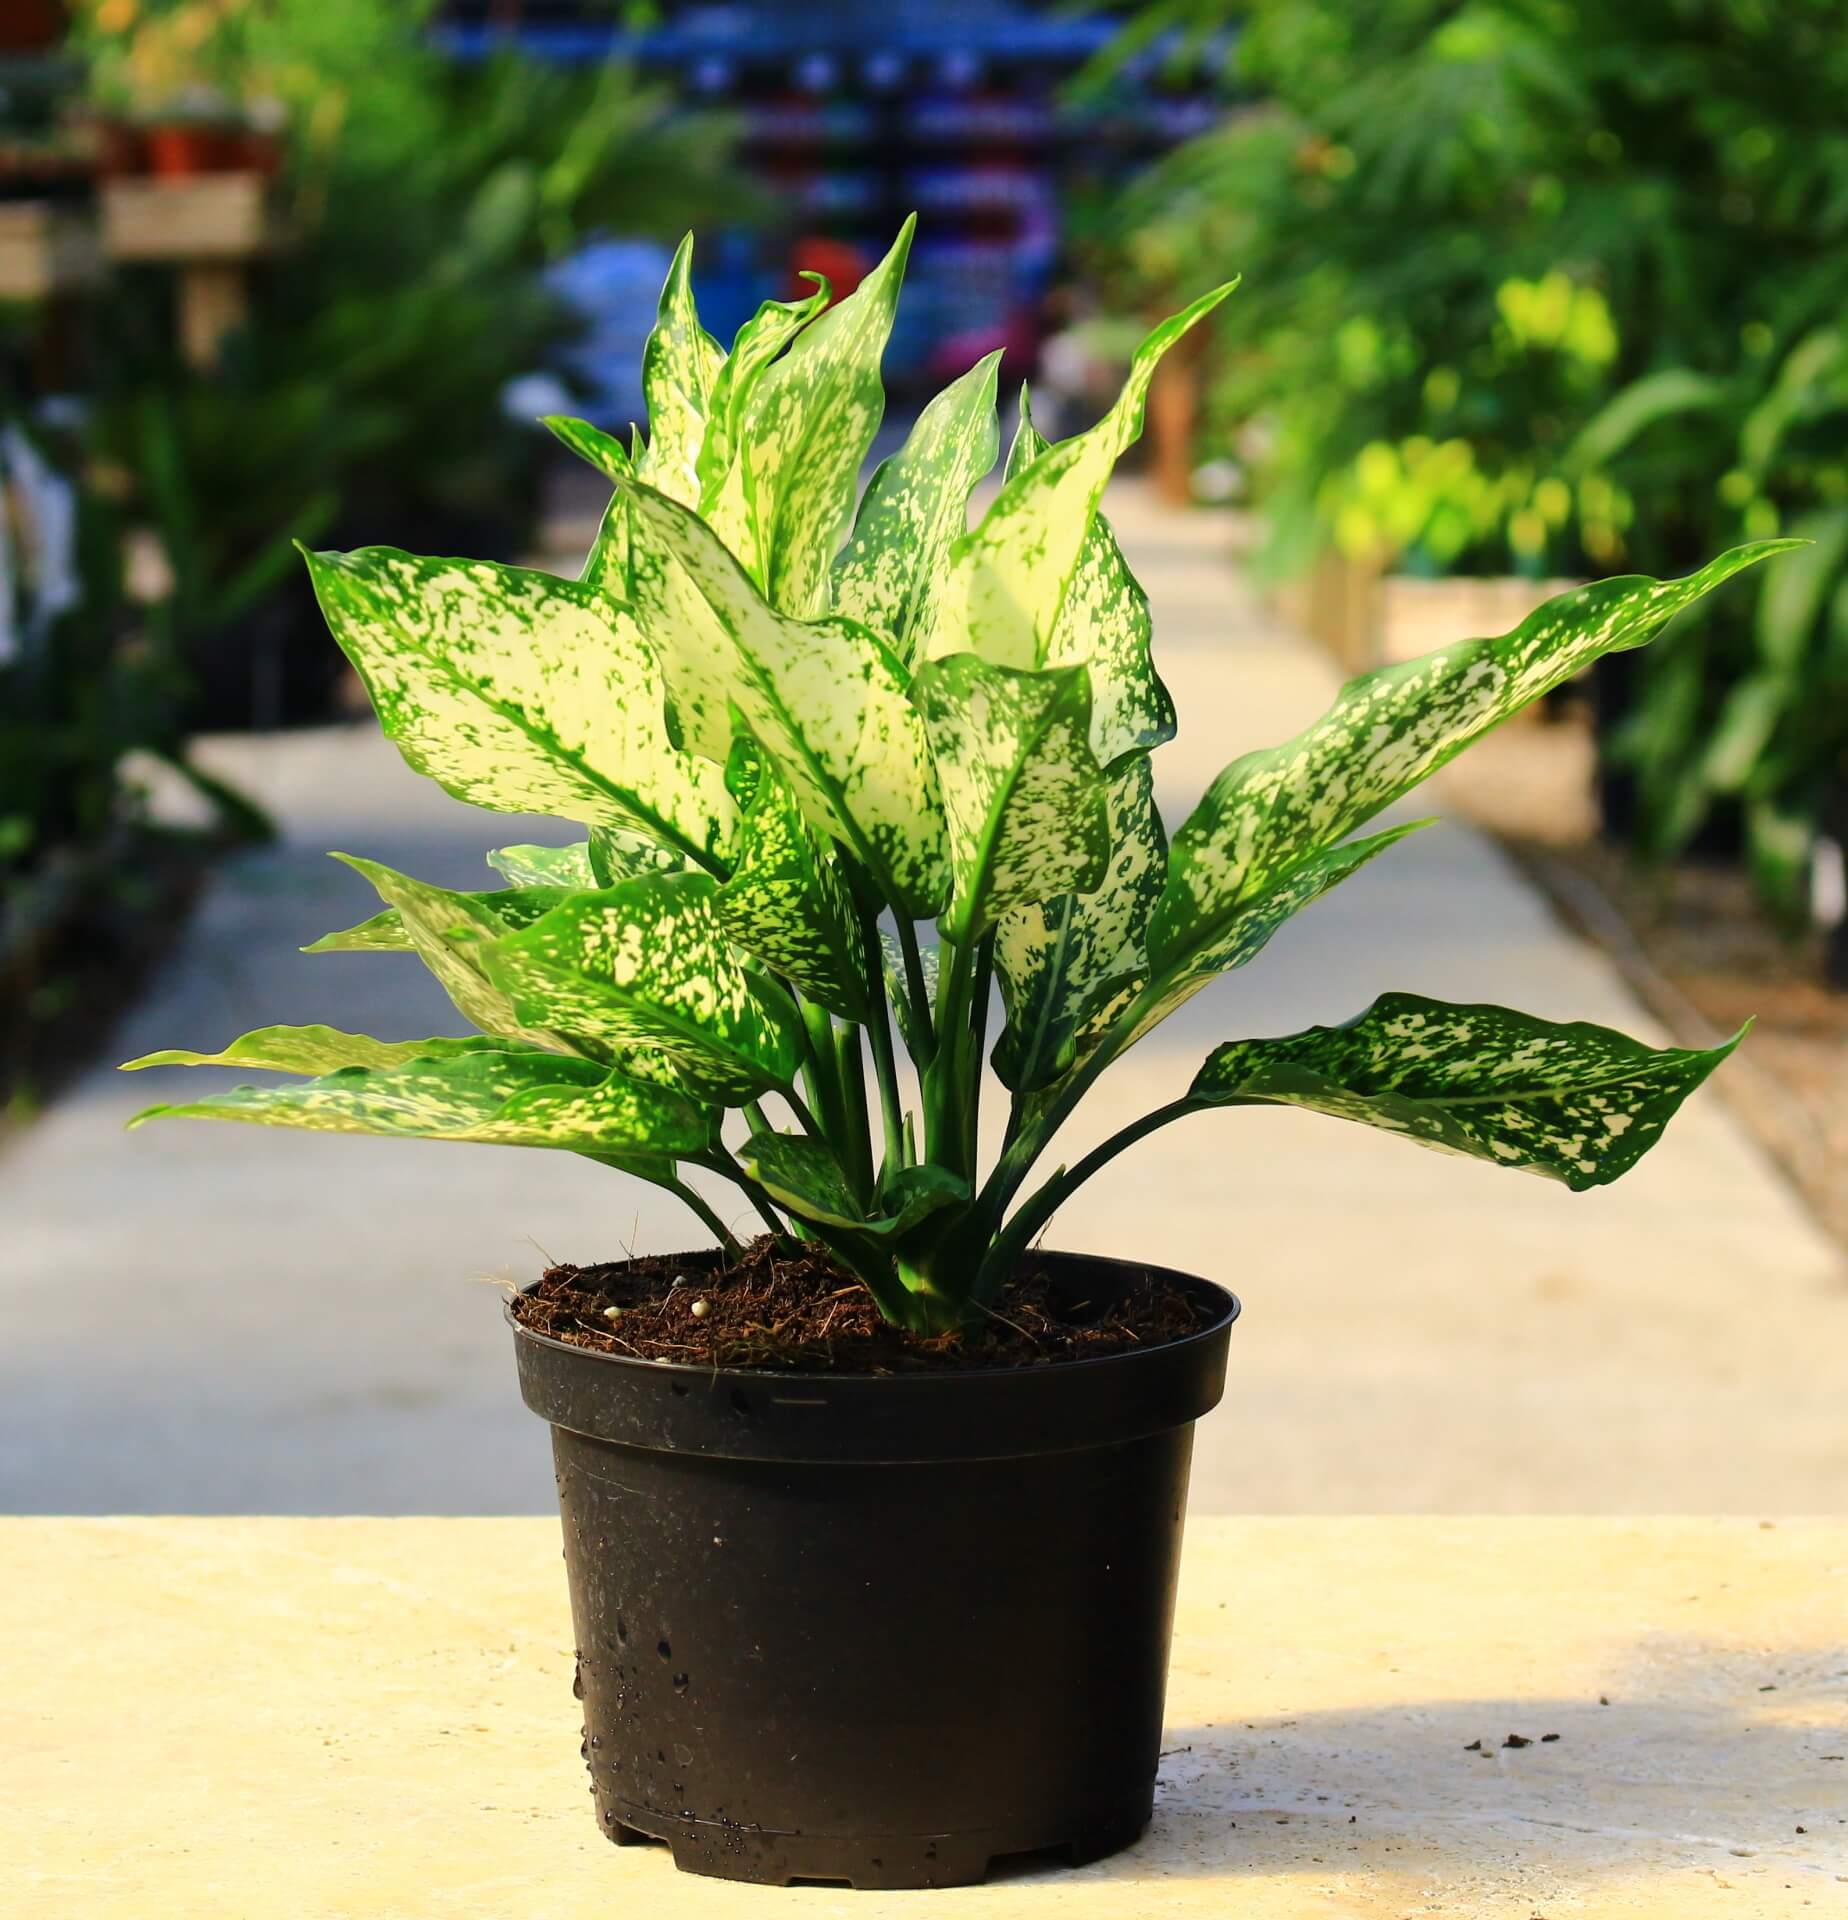 Aglaonema 'White Dalmatian' has bright green leaves with ivory flecks in the center